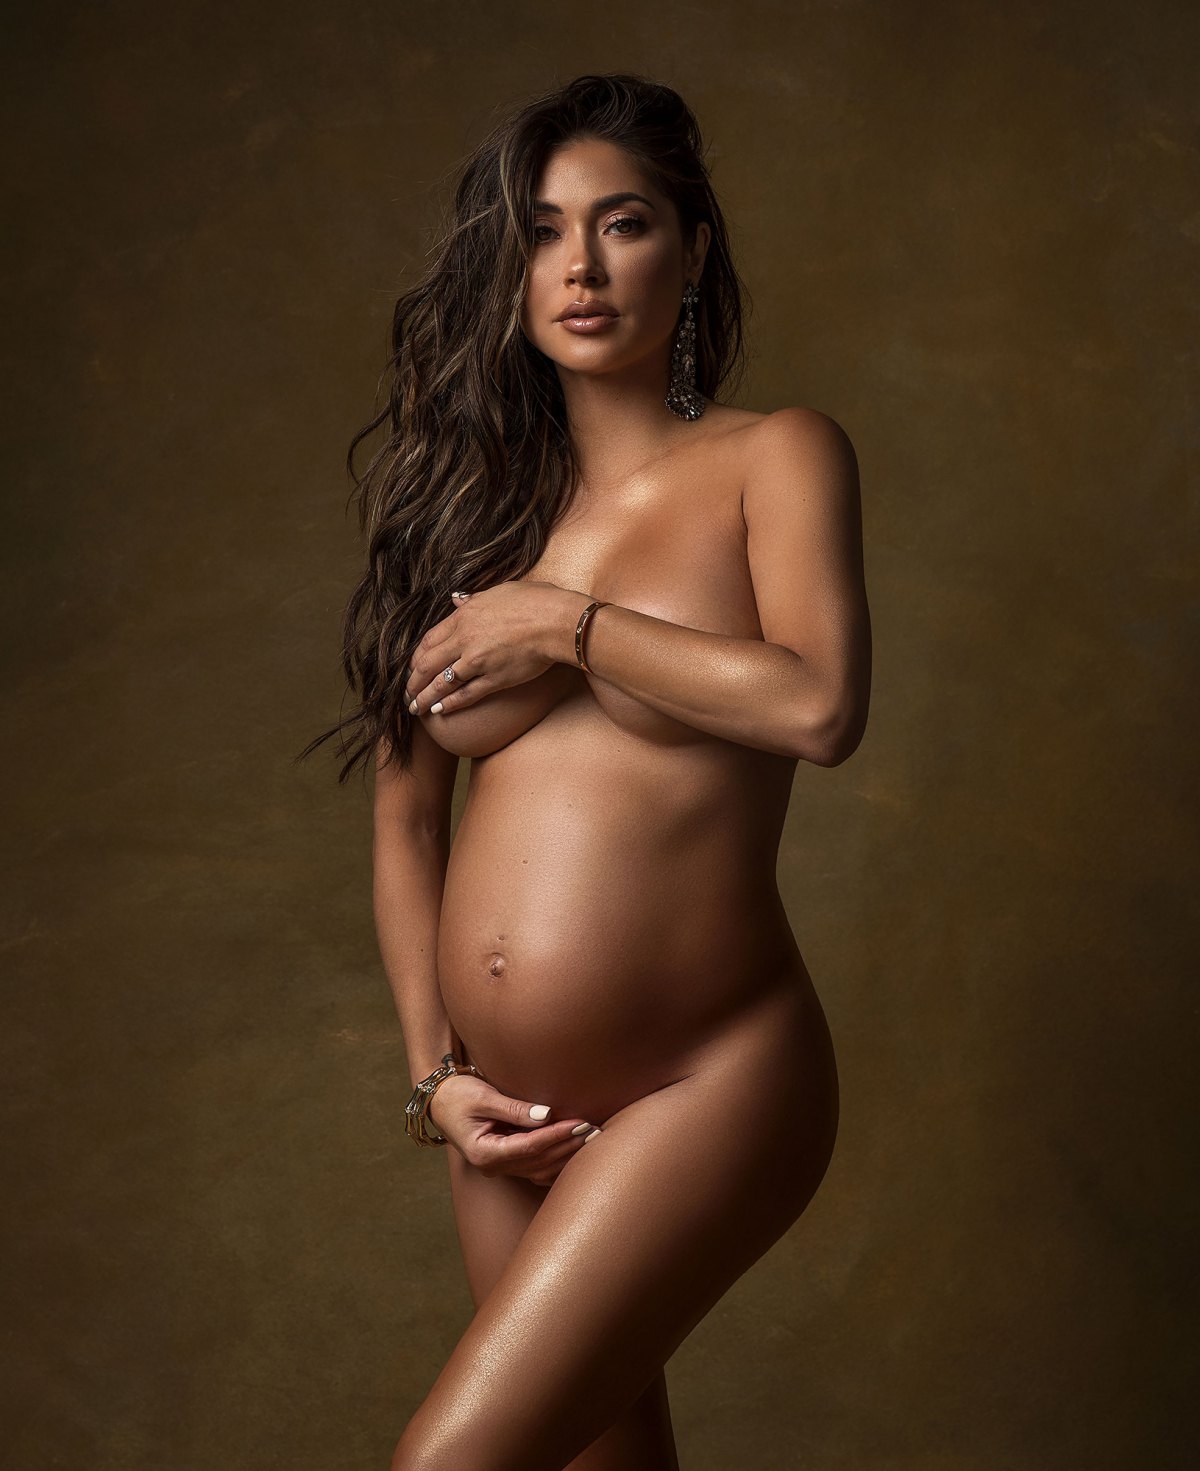 Naked Pregnant Indian - Celebrities Posing Nude While Pregnant: Maternity Pics